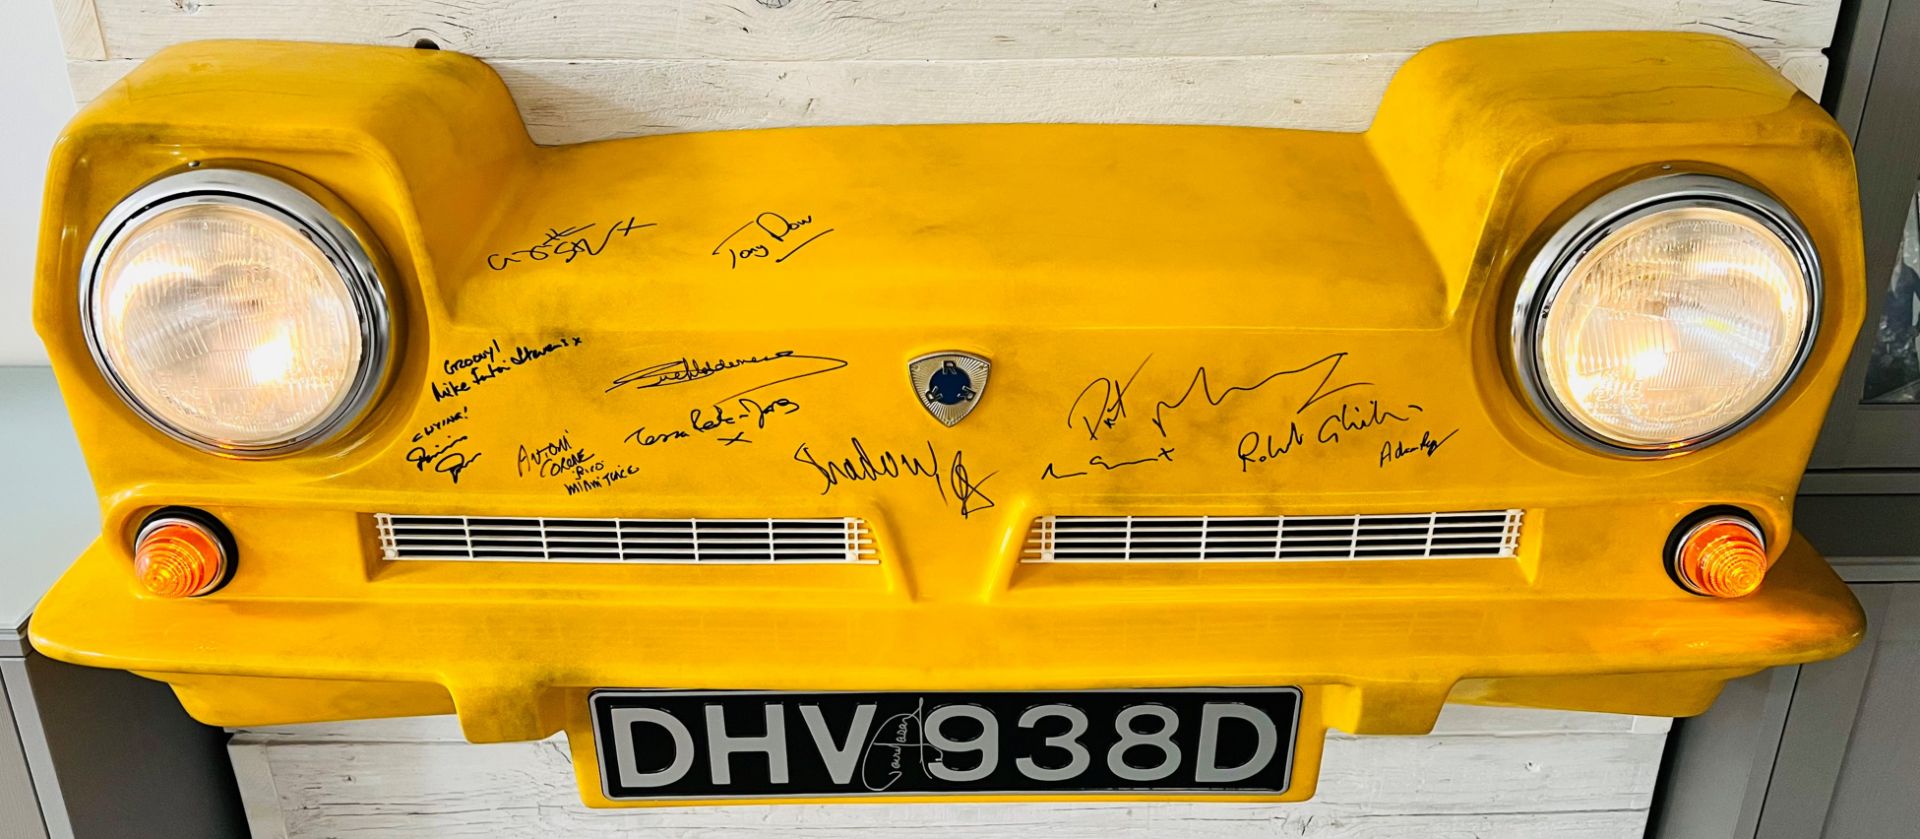 ONLY FOOLS & HORSES - TROTTER VAN FRONT END - SIGNED BY DAVID JASON + CAST - Image 5 of 12